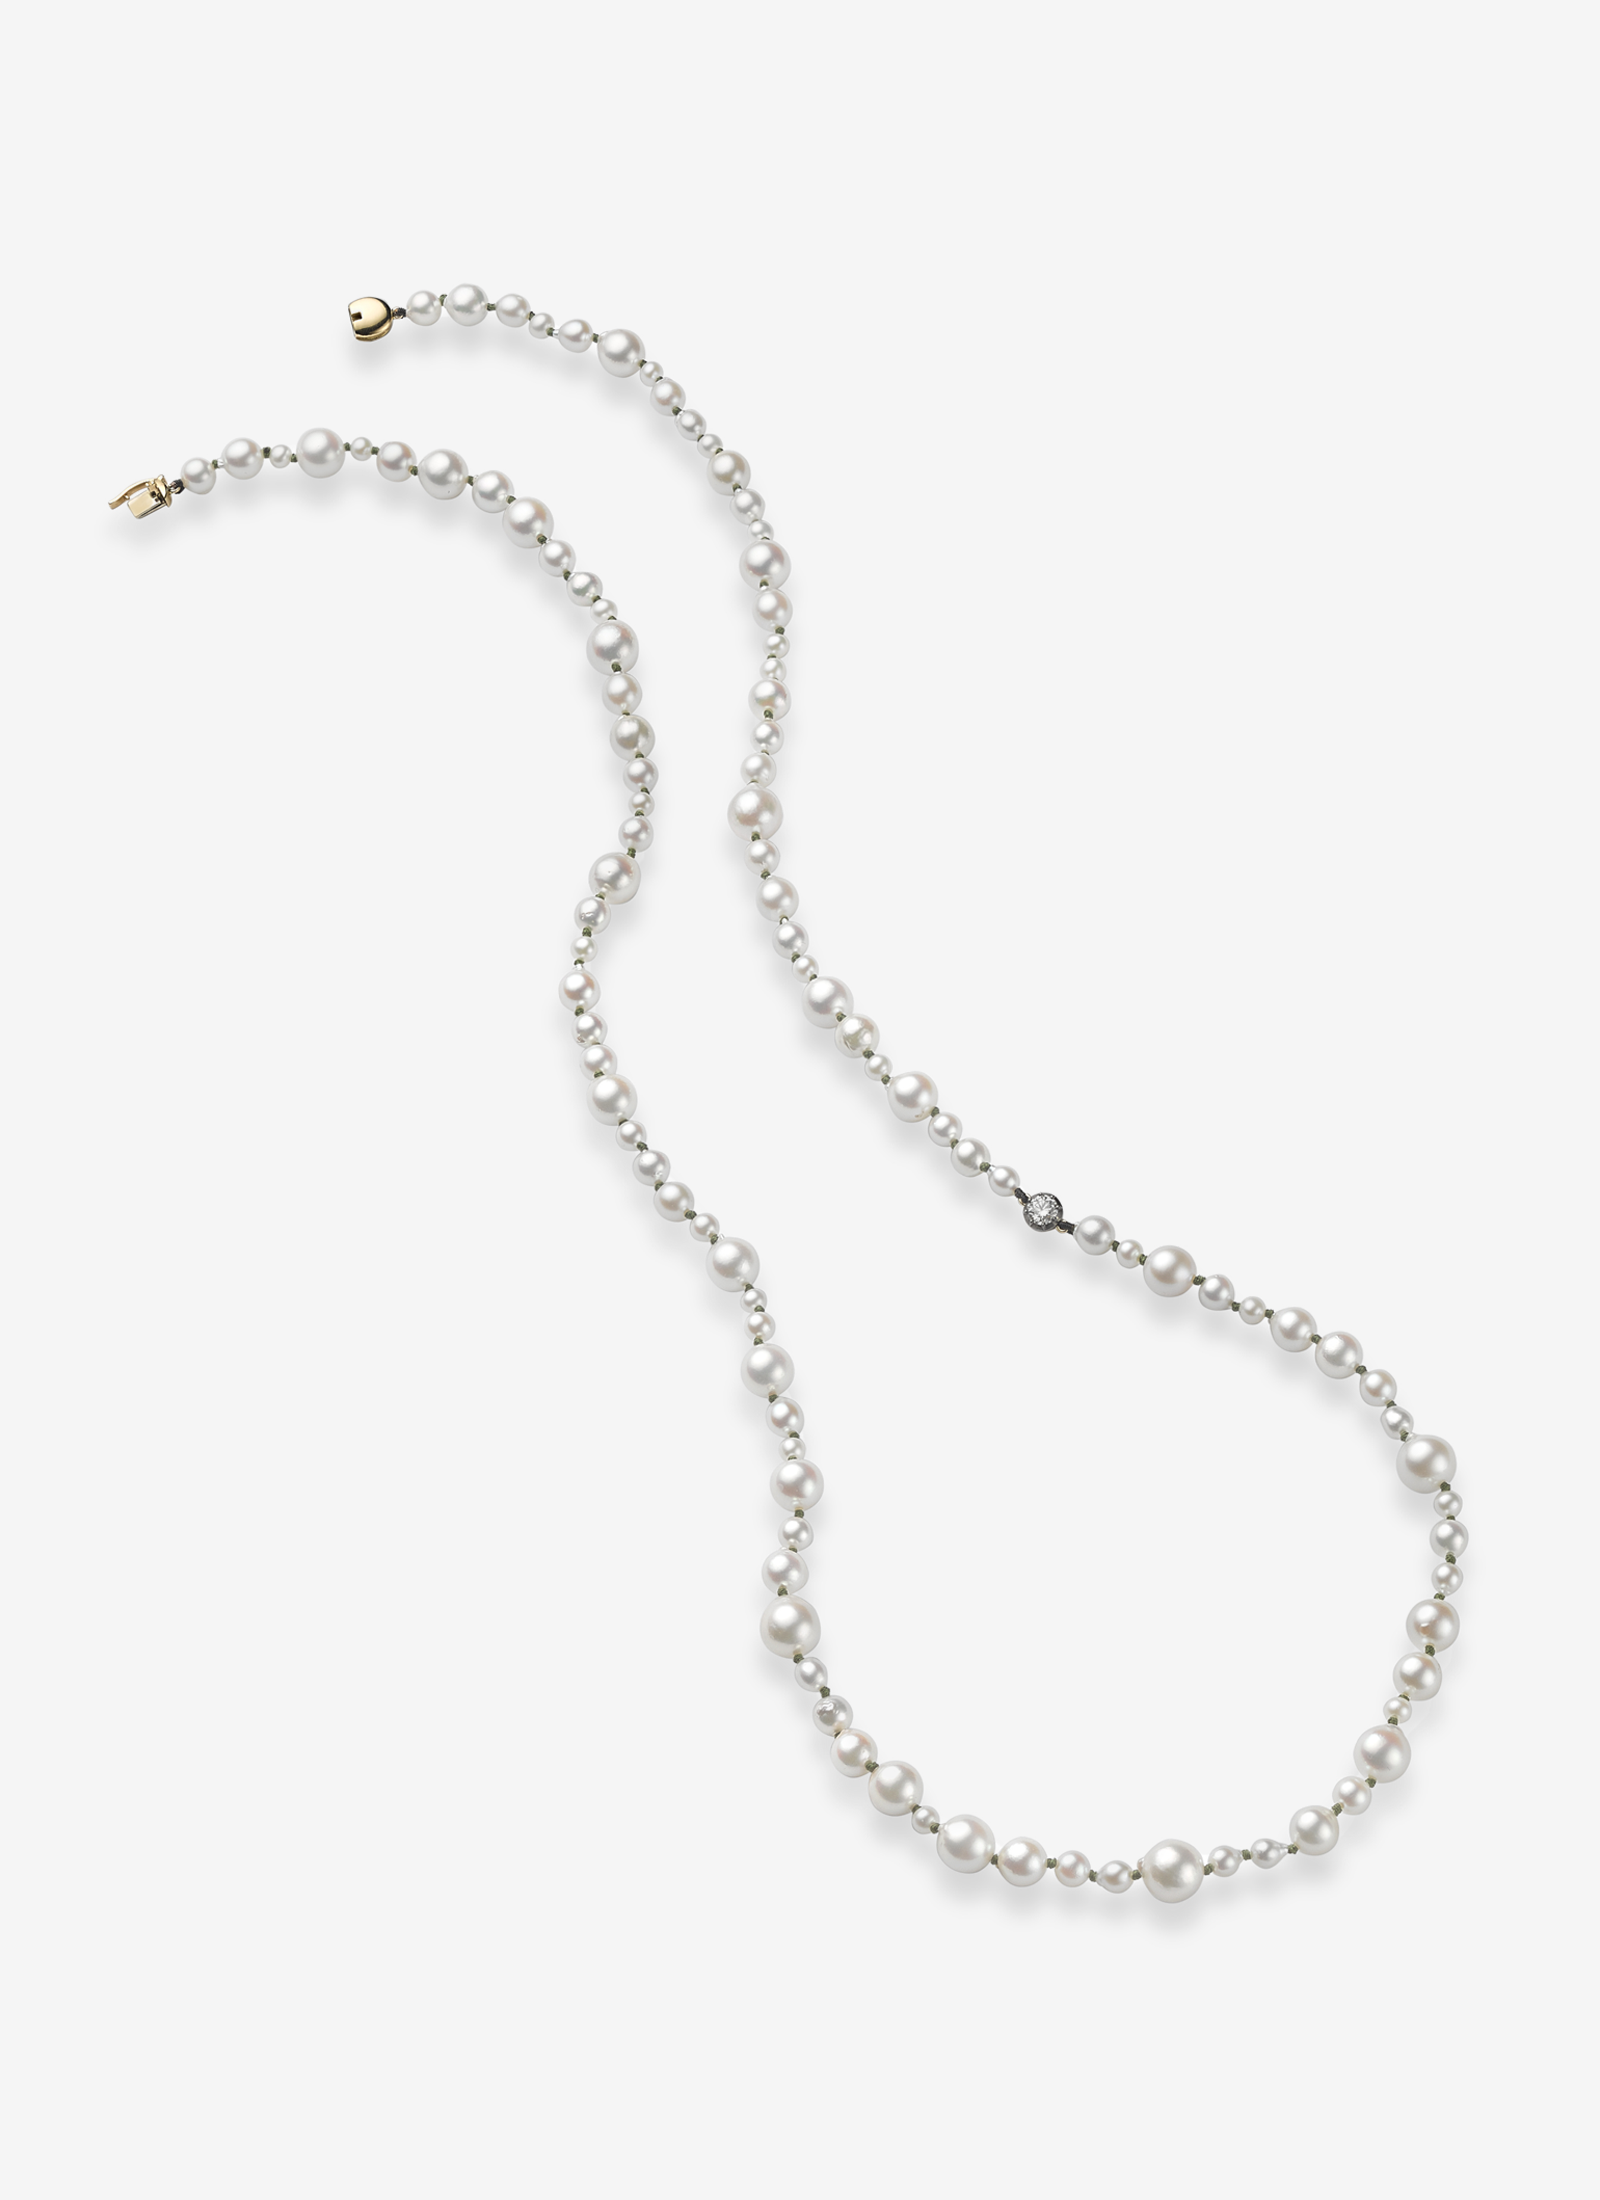 Beaches Pearl Necklace - 30" 18K Gold Necklace with 0.40ct diamond & pearls